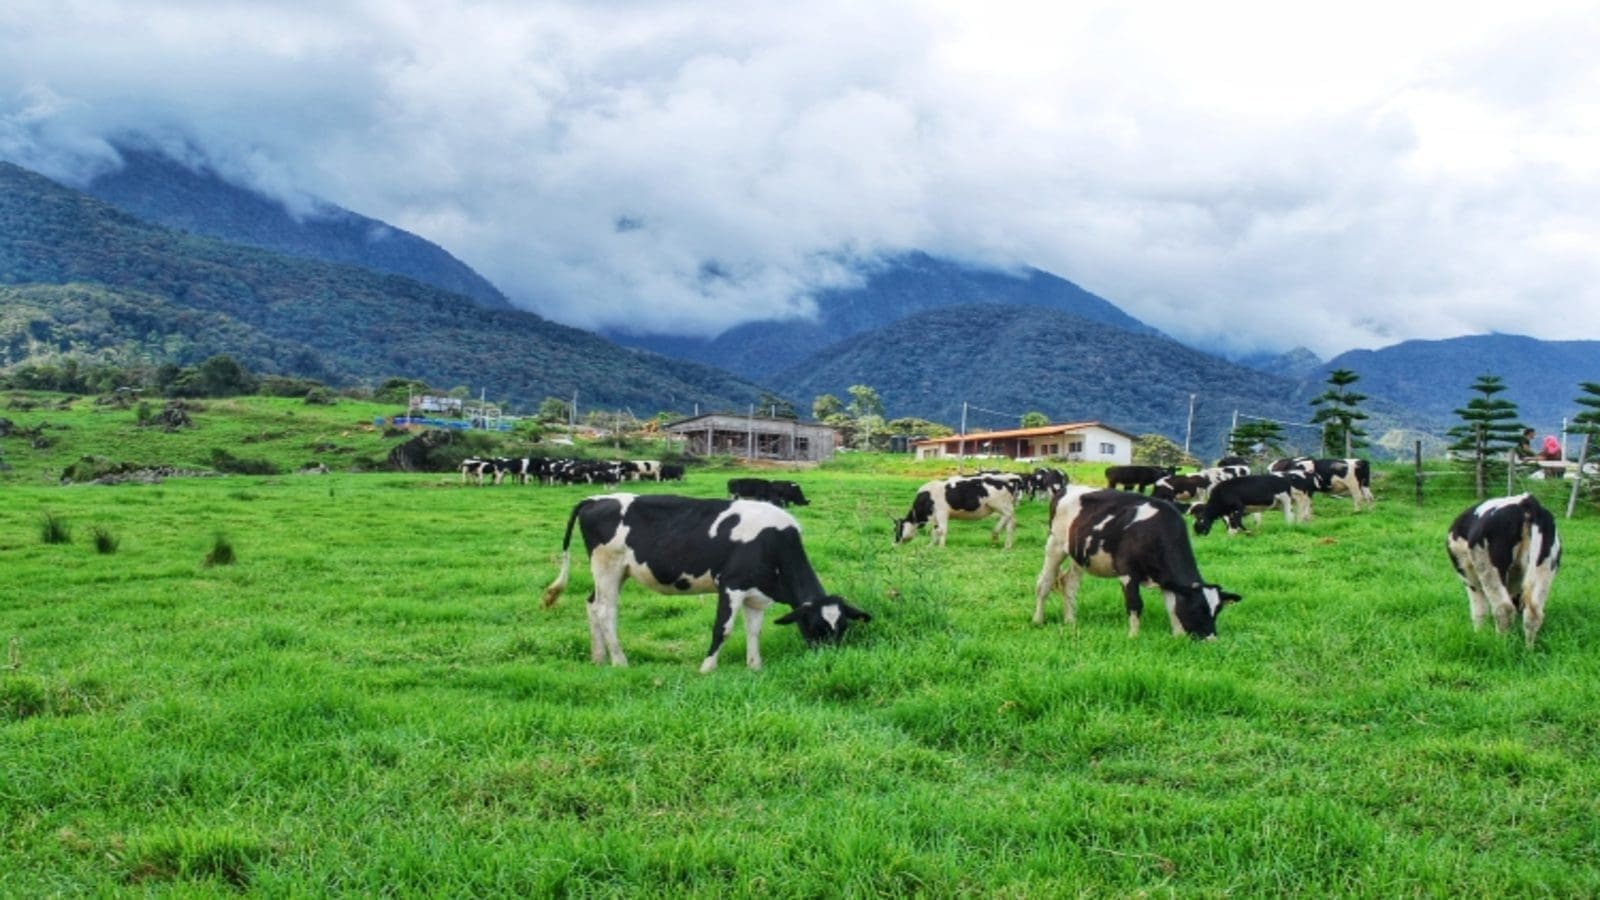 McDonald’s, FrieslandCampina partner to reduce GHG emissions in dairy sector